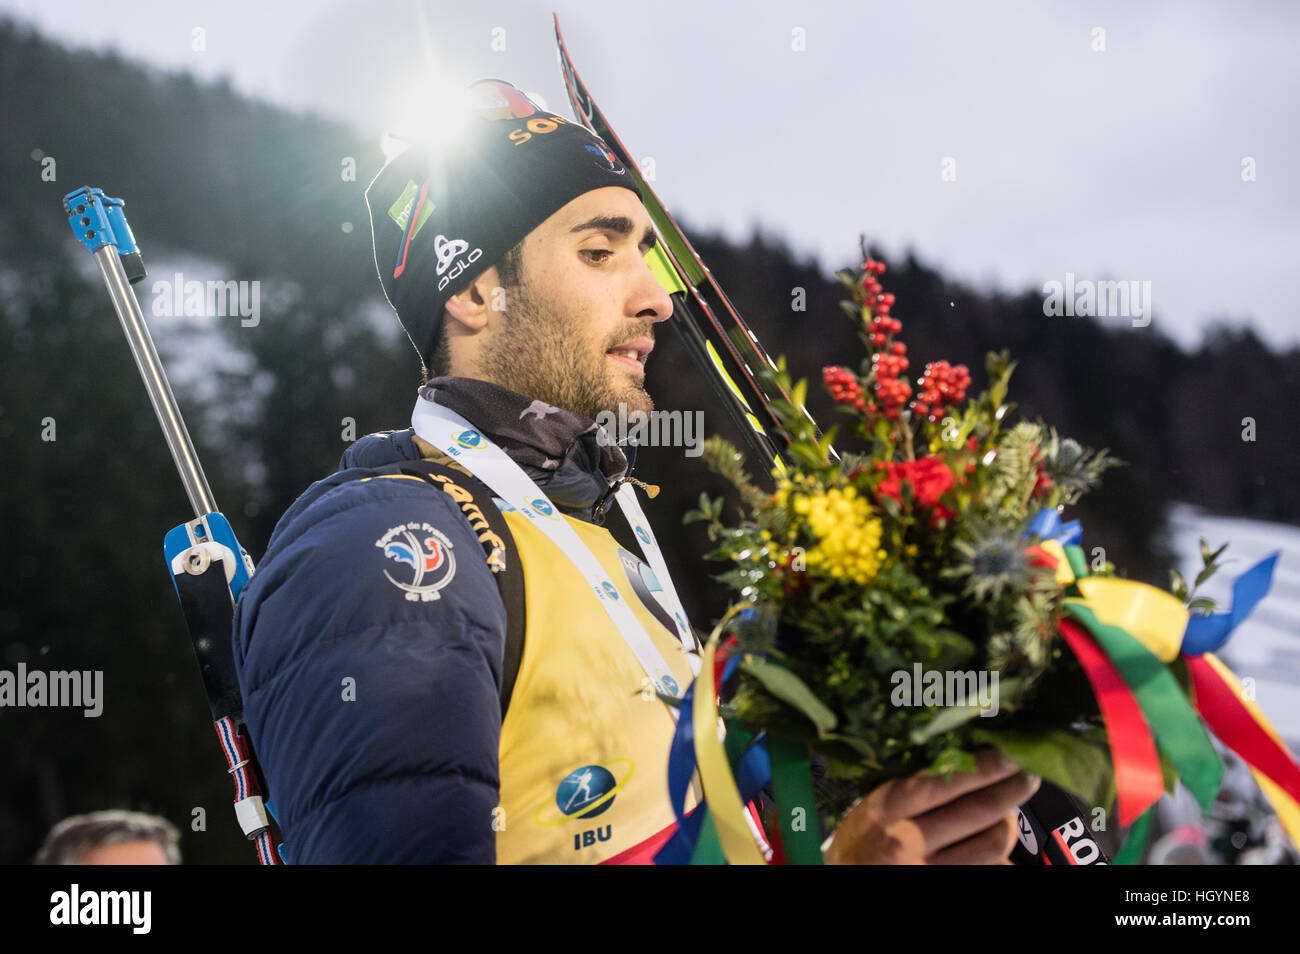 Ruhpolding, Germany. 13th Jan, 2017. French biathlete Martin Fourcade on the victors' podium after competing in the men's 10 kilometer sprint at the Biathlon World Cup in the Chiemgau Arena in Ruhpolding, Germany, 13 January 2017. Fourcade finished in 1st place, Eberhard in 2nd place and Svendsen in 3rd place. Photo: Matthias Balk/dpa/Alamy Live News Stock Photo